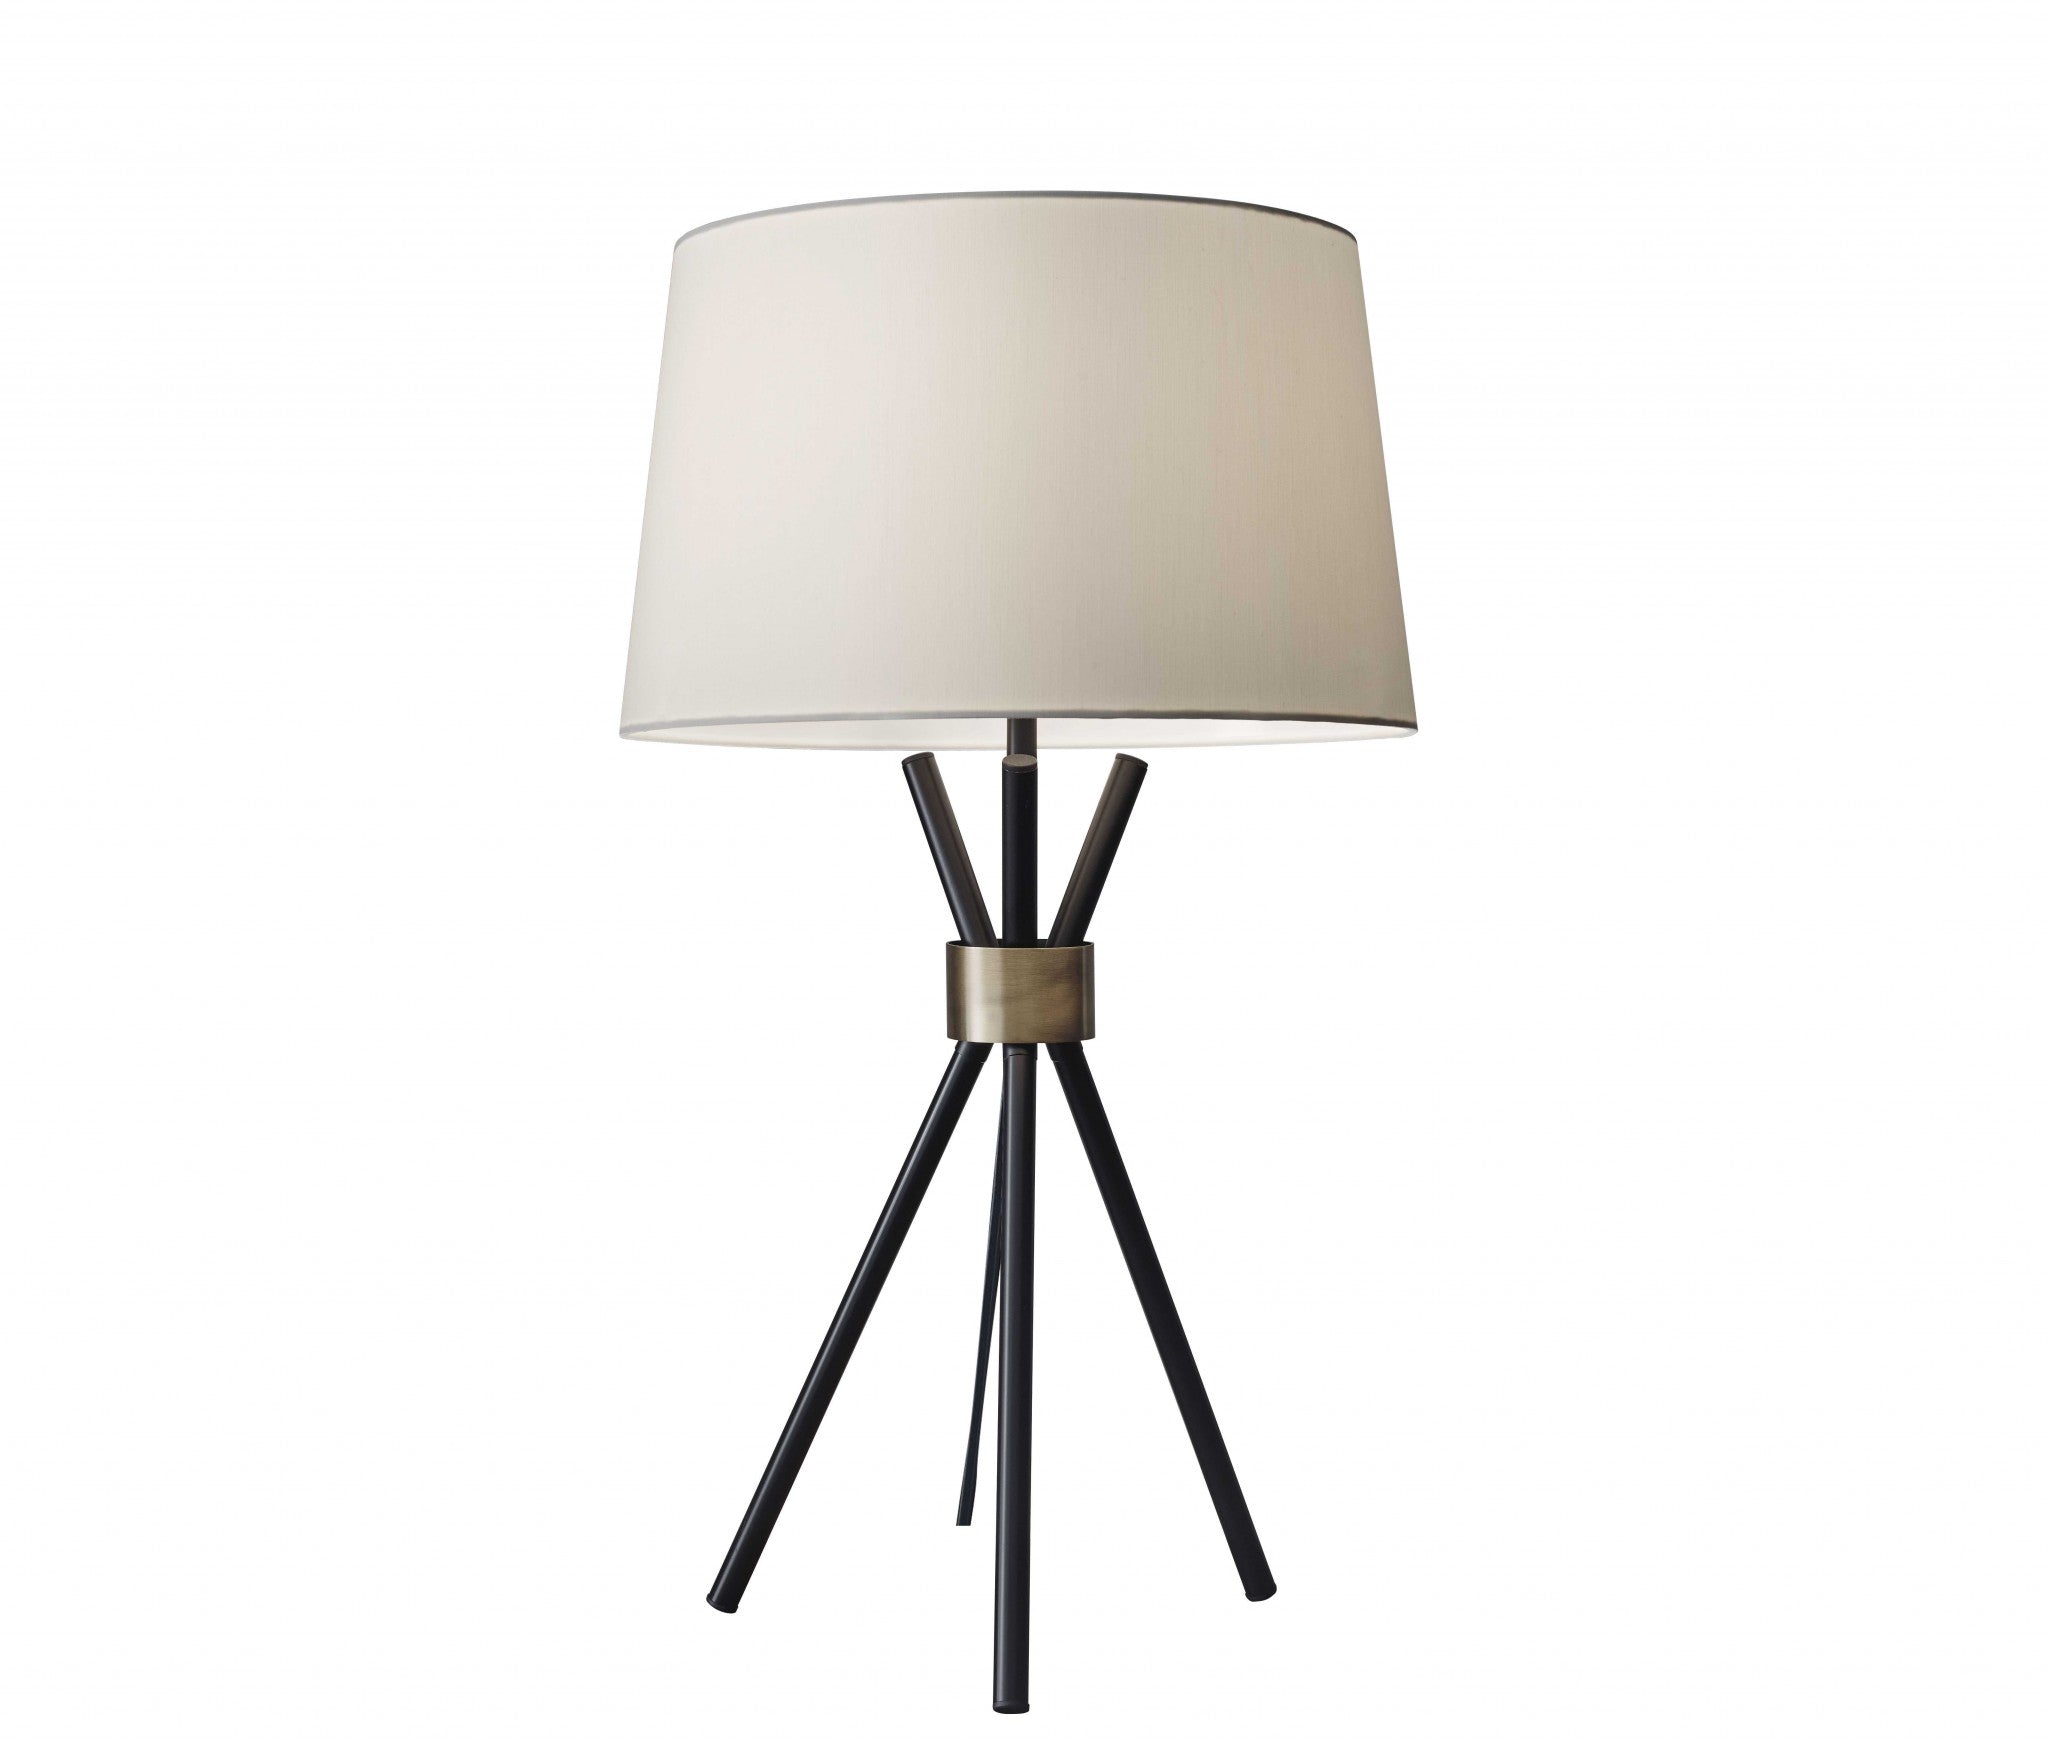 Black-Metal-Tripod-Leg-With-Antique-Brass-Accent-Table-Lamp-Table-Lamps